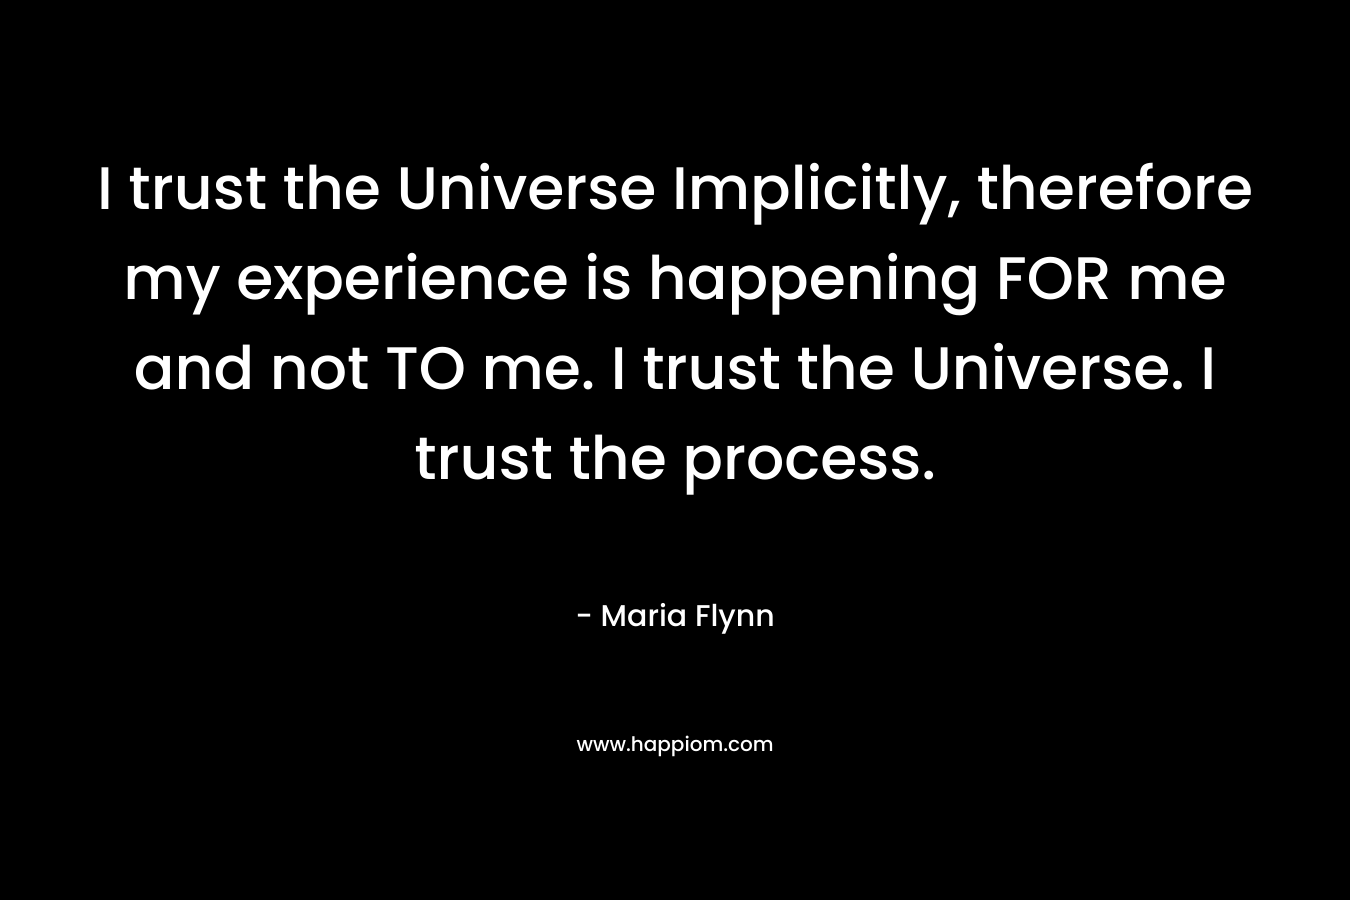 I trust the Universe Implicitly, therefore my experience is happening FOR me and not TO me. I trust the Universe. I trust the process.